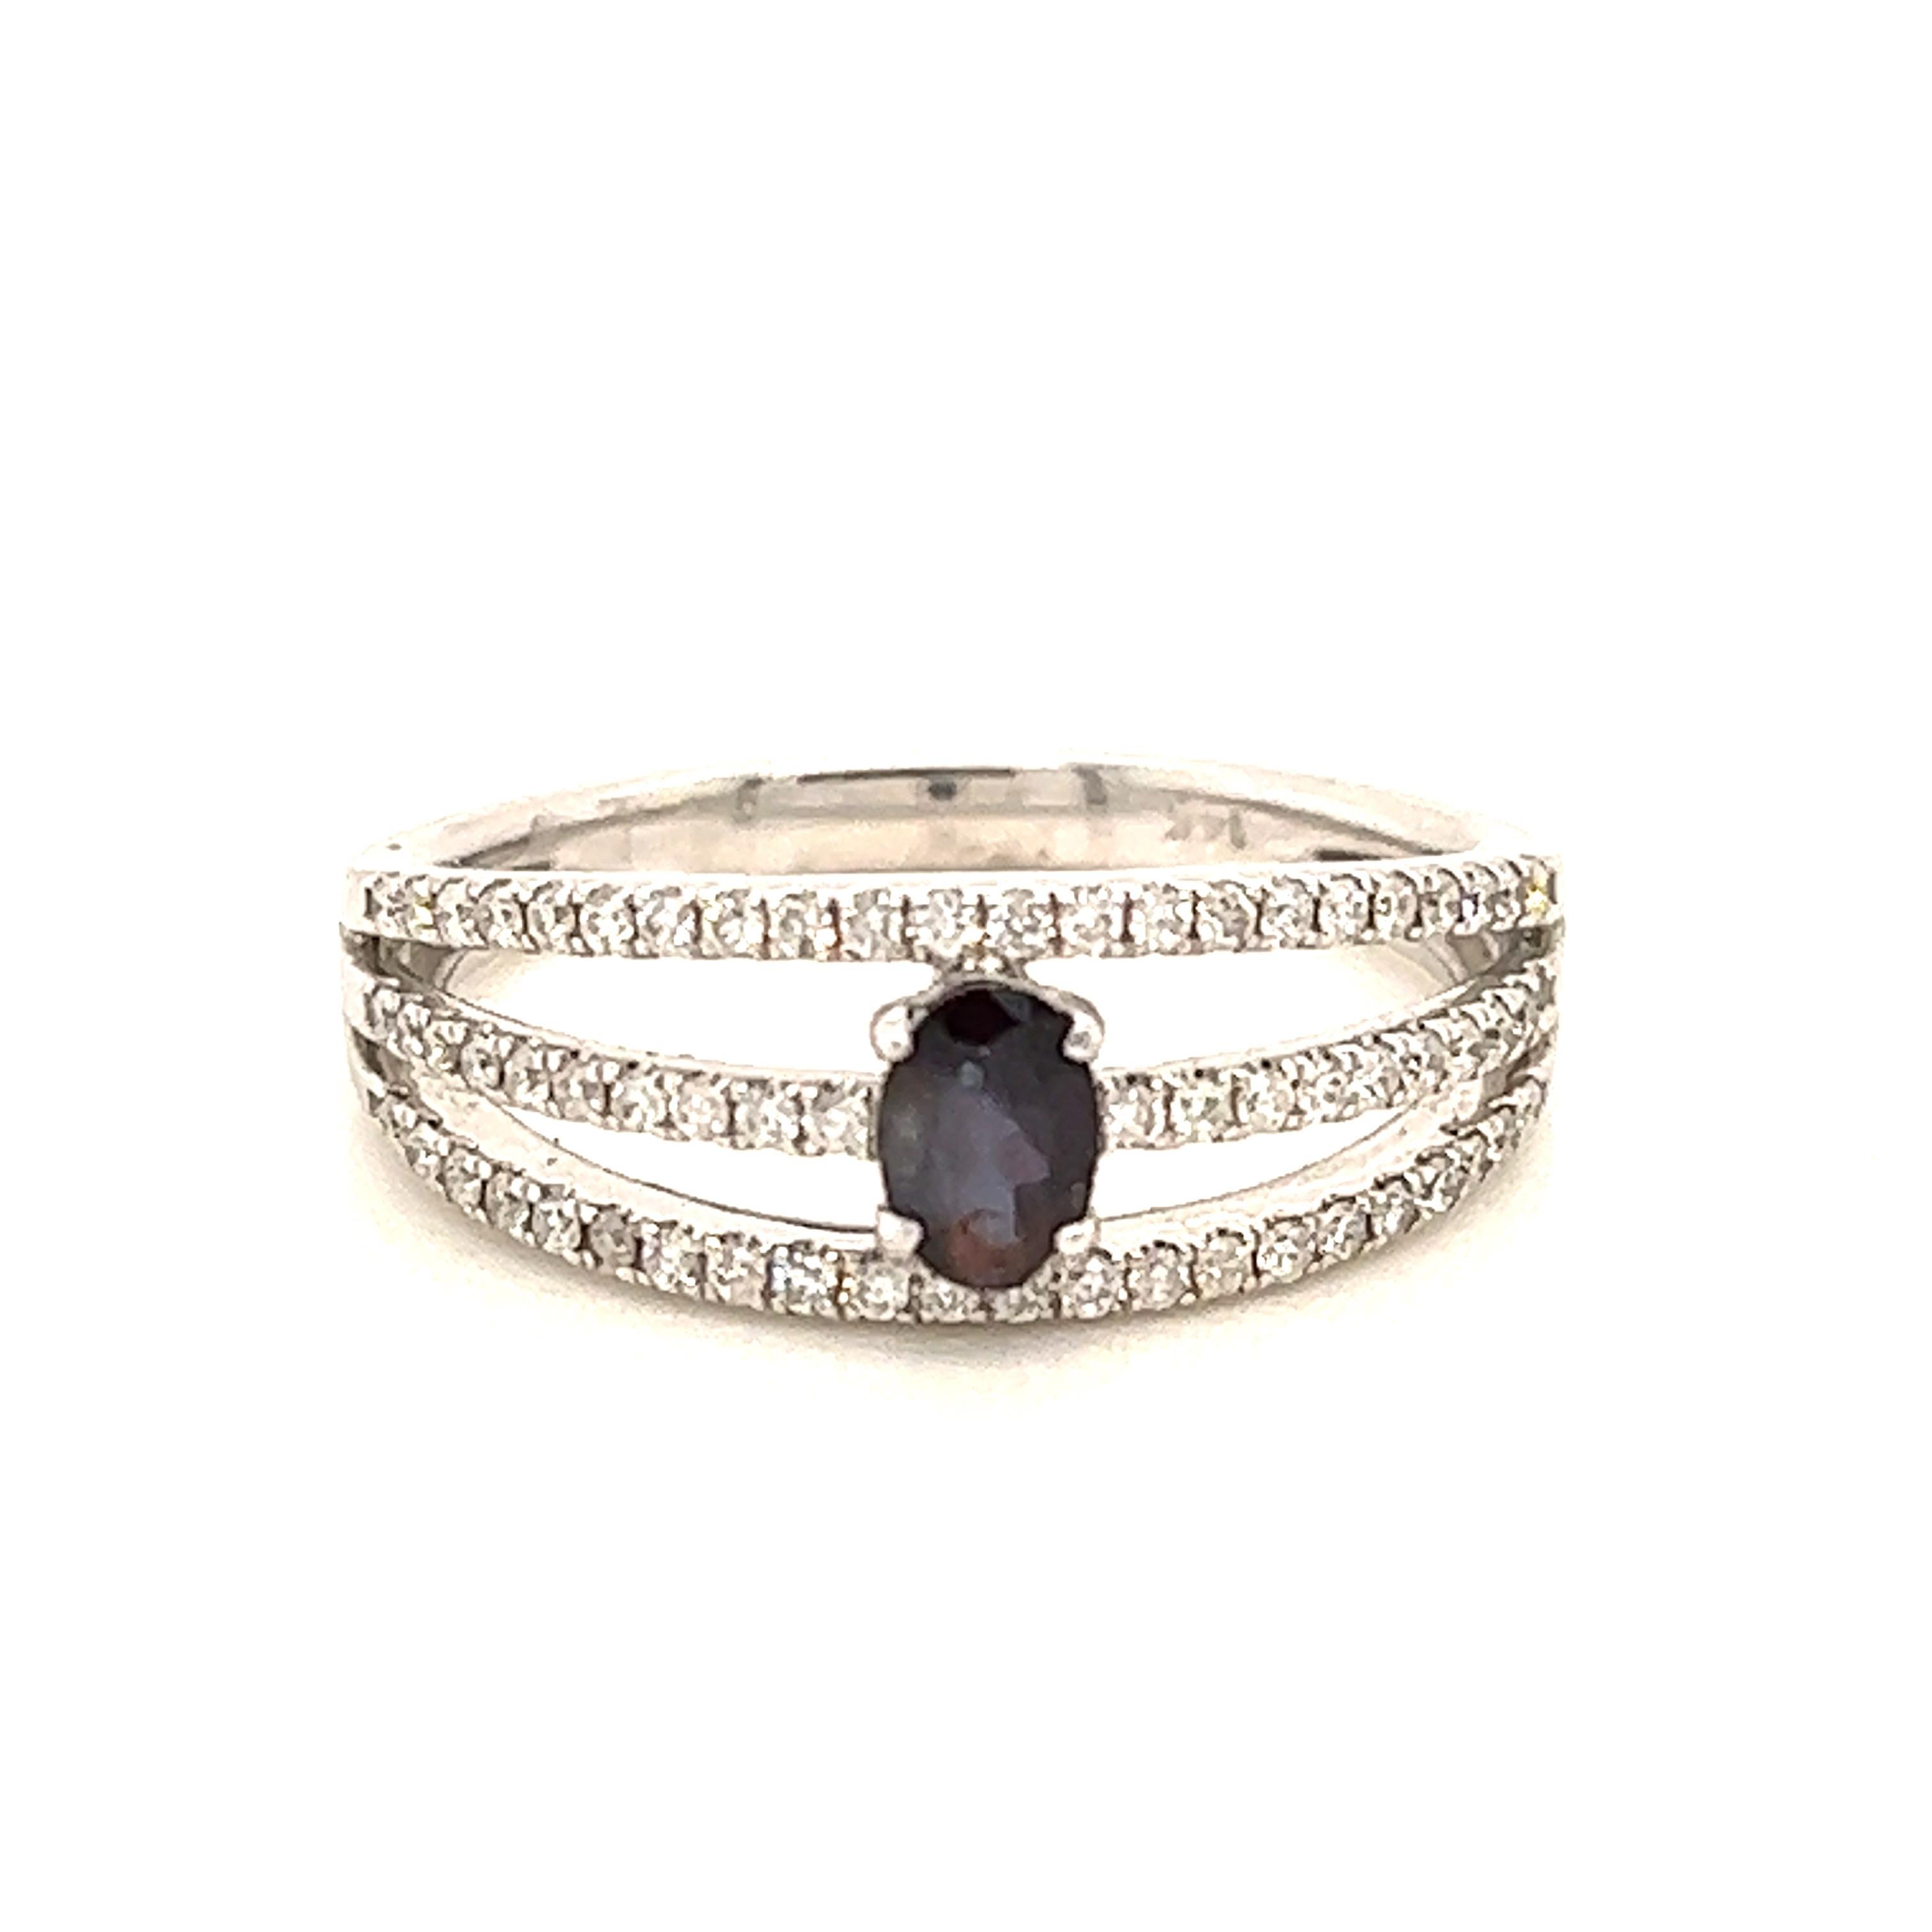 This is a gorgeous natural AAA quality oval Alexandrite surrounded by dainty diamonds that is set in a vintage white gold setting. This ring features a natural 0.34 carat cushion alexandrite that is surrounded by brilliant white diamonds. The ring